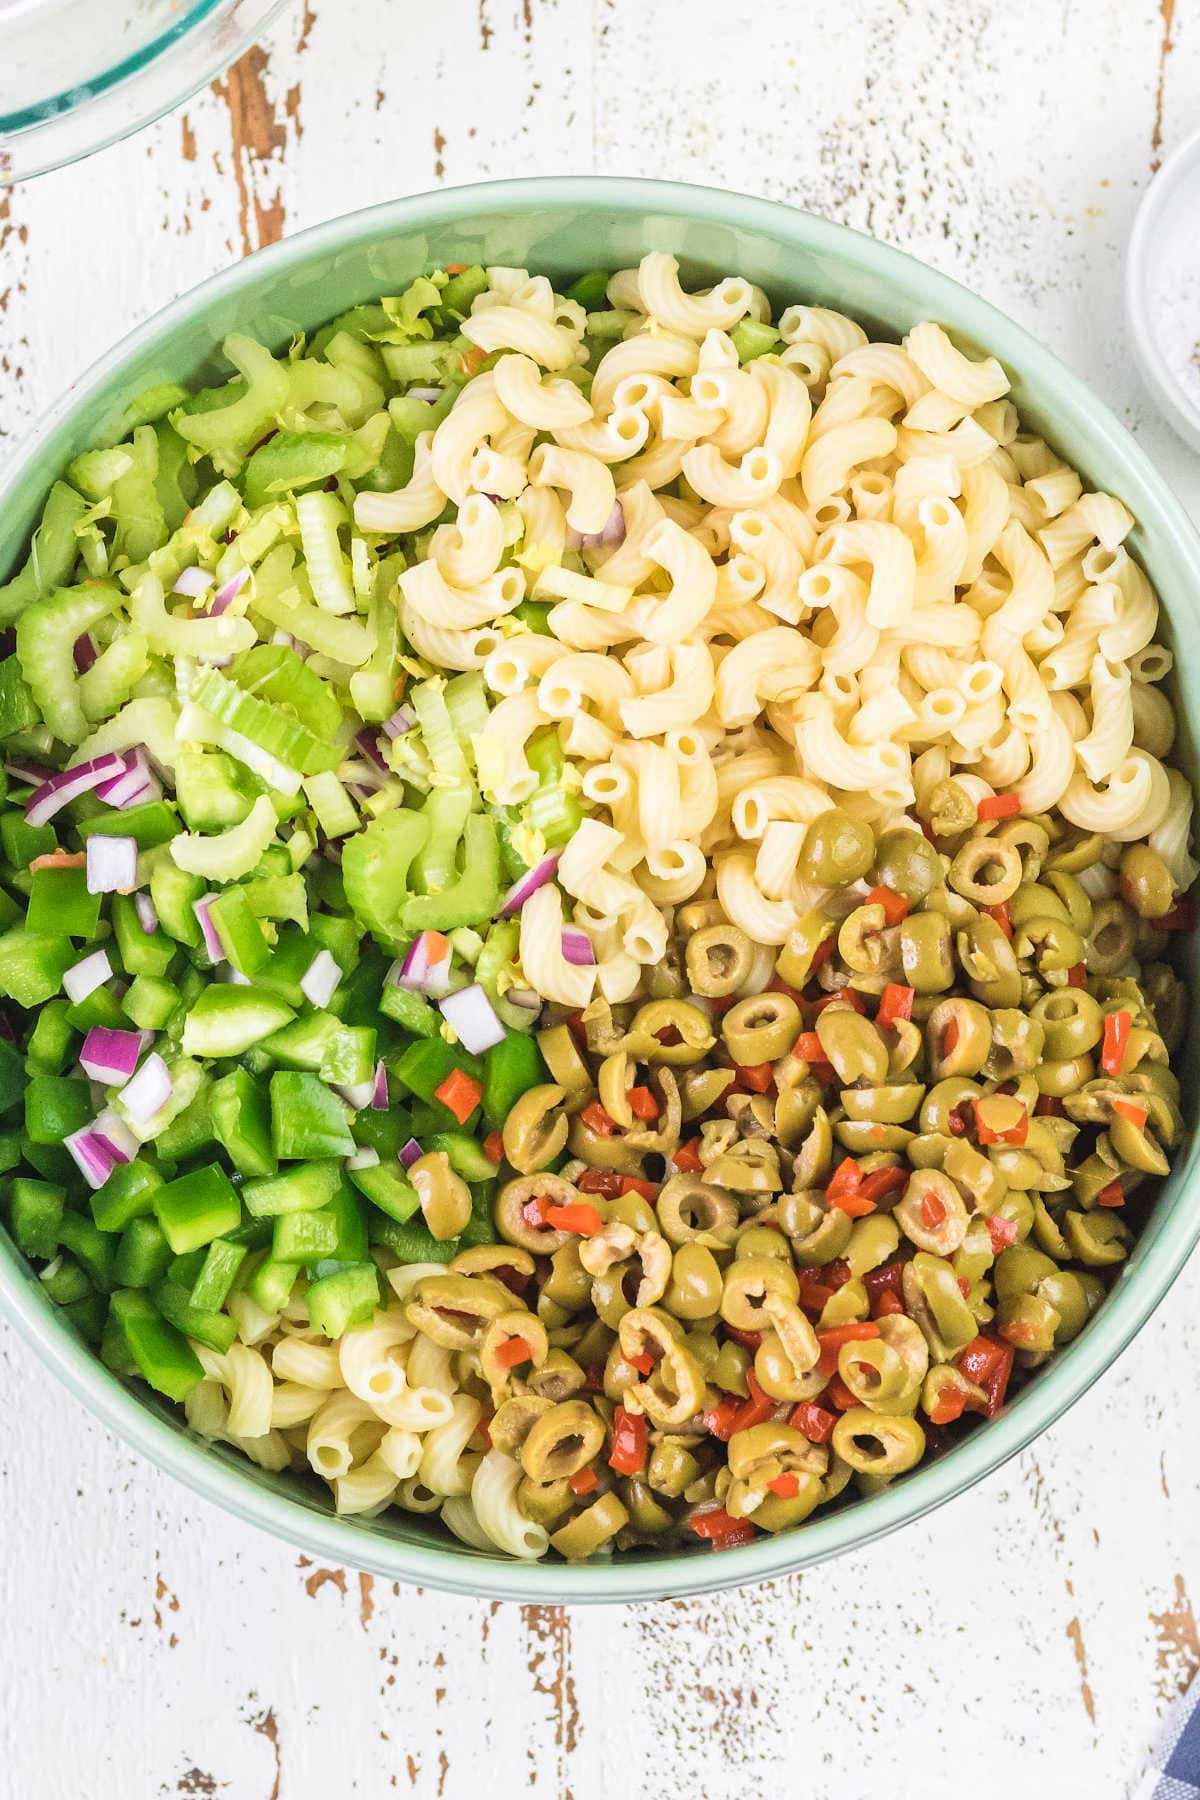 Macaroni, celery, and other salad ingredients in a bowl.